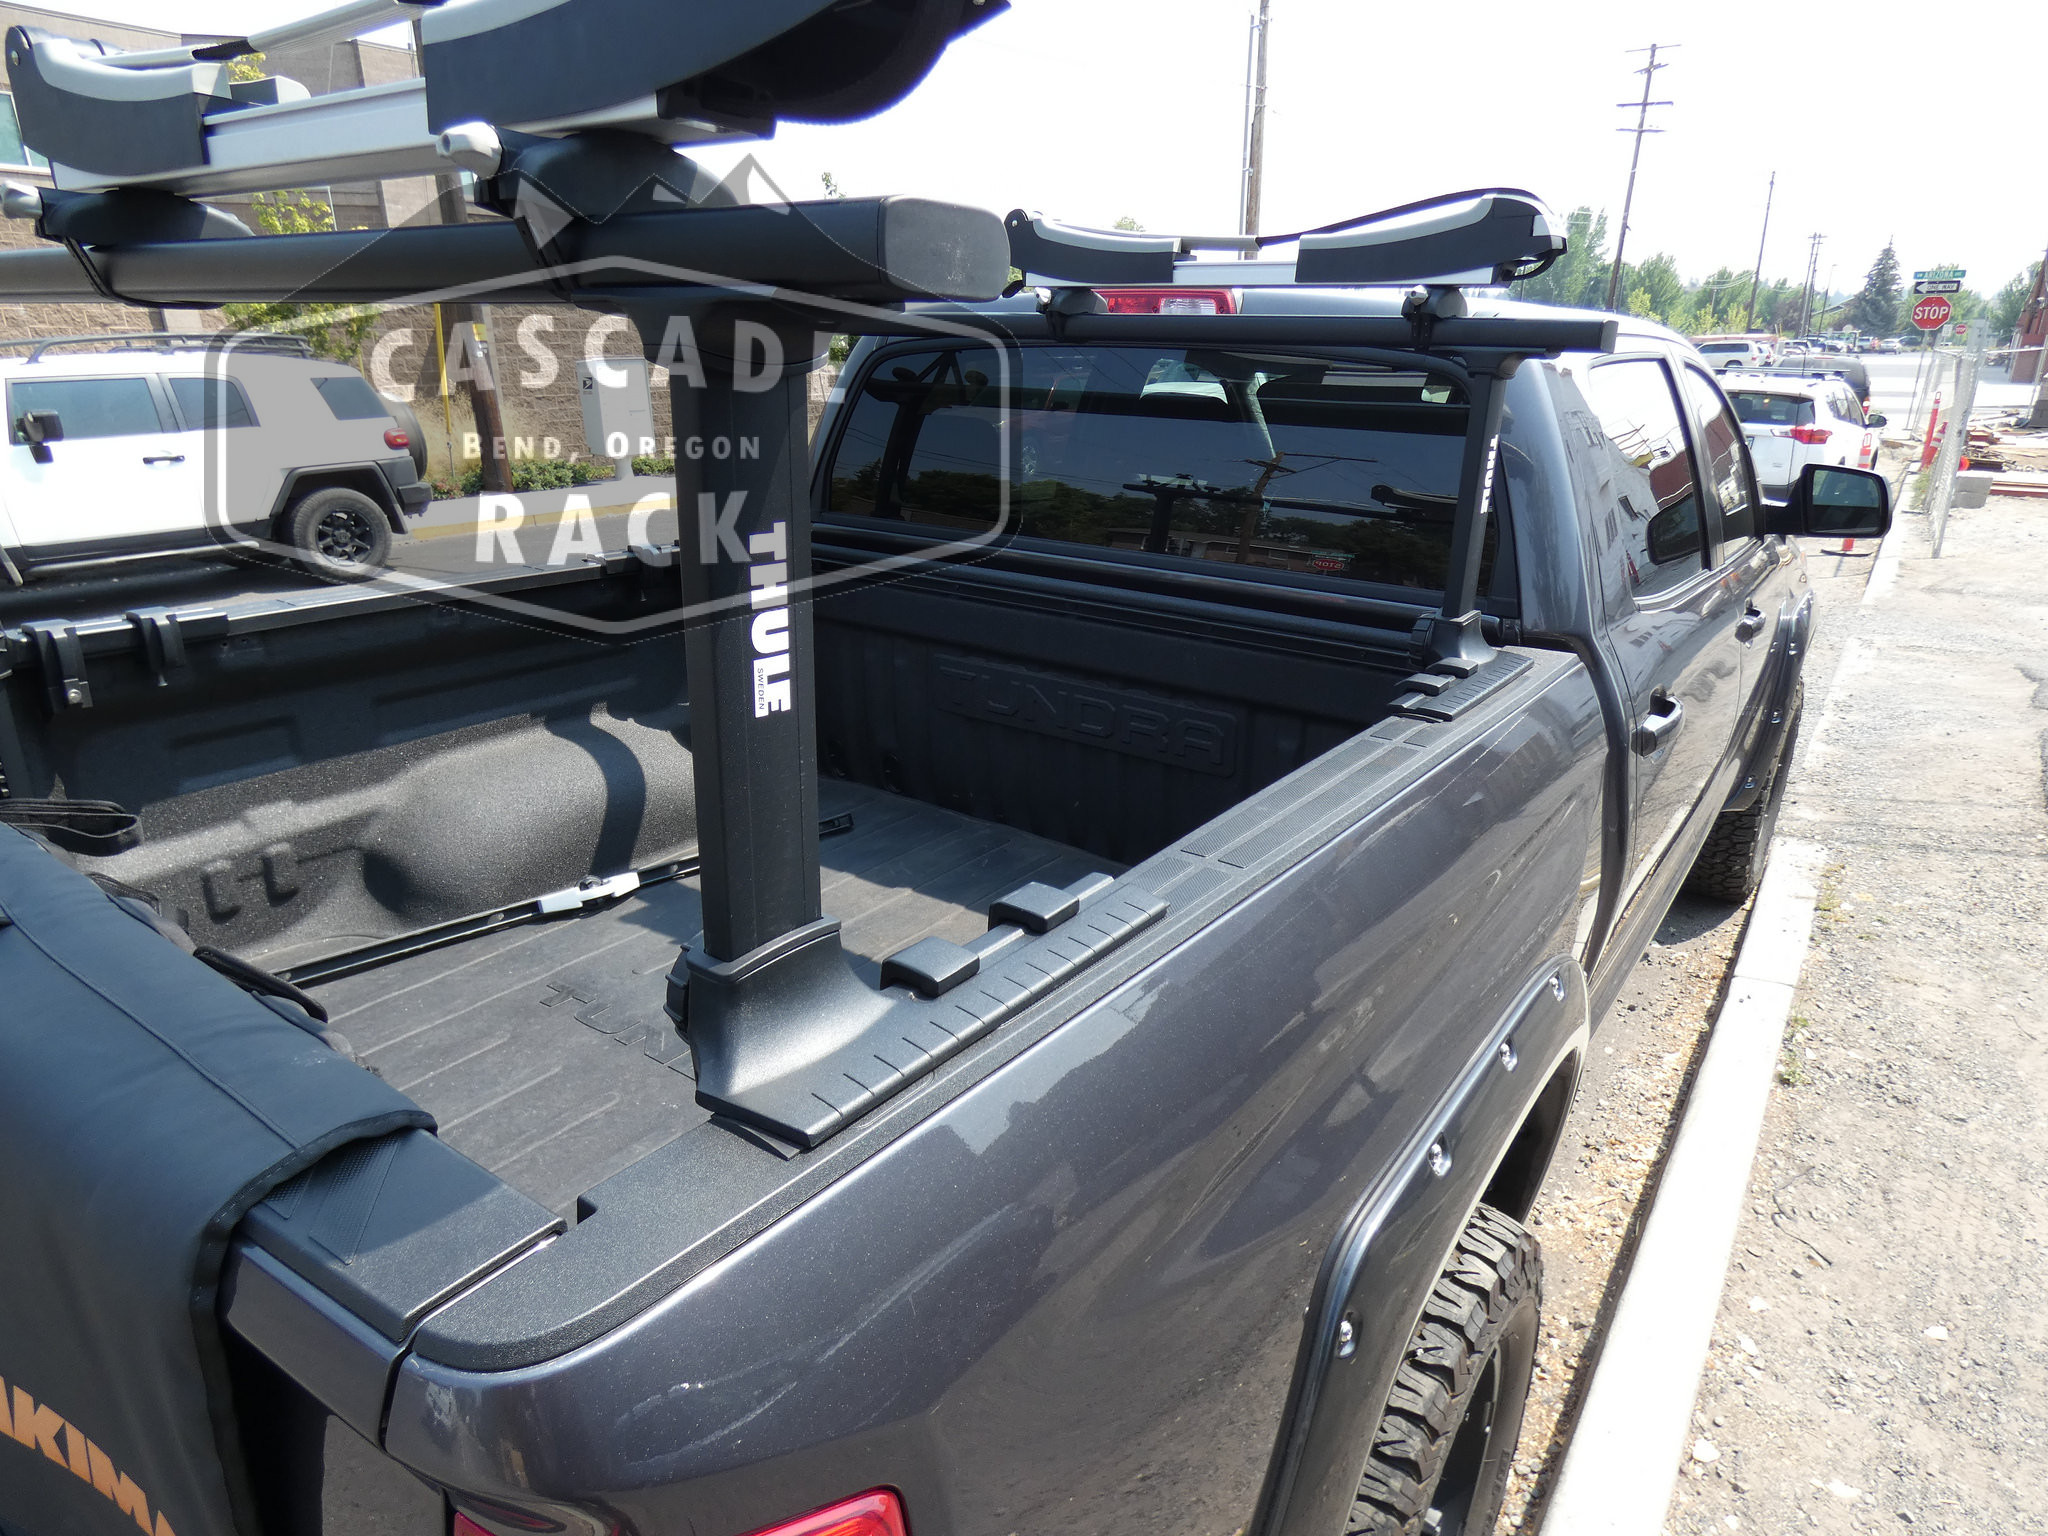 2016 Toyota Tundra - Truck Bed Rack and SUP Rack - Thule